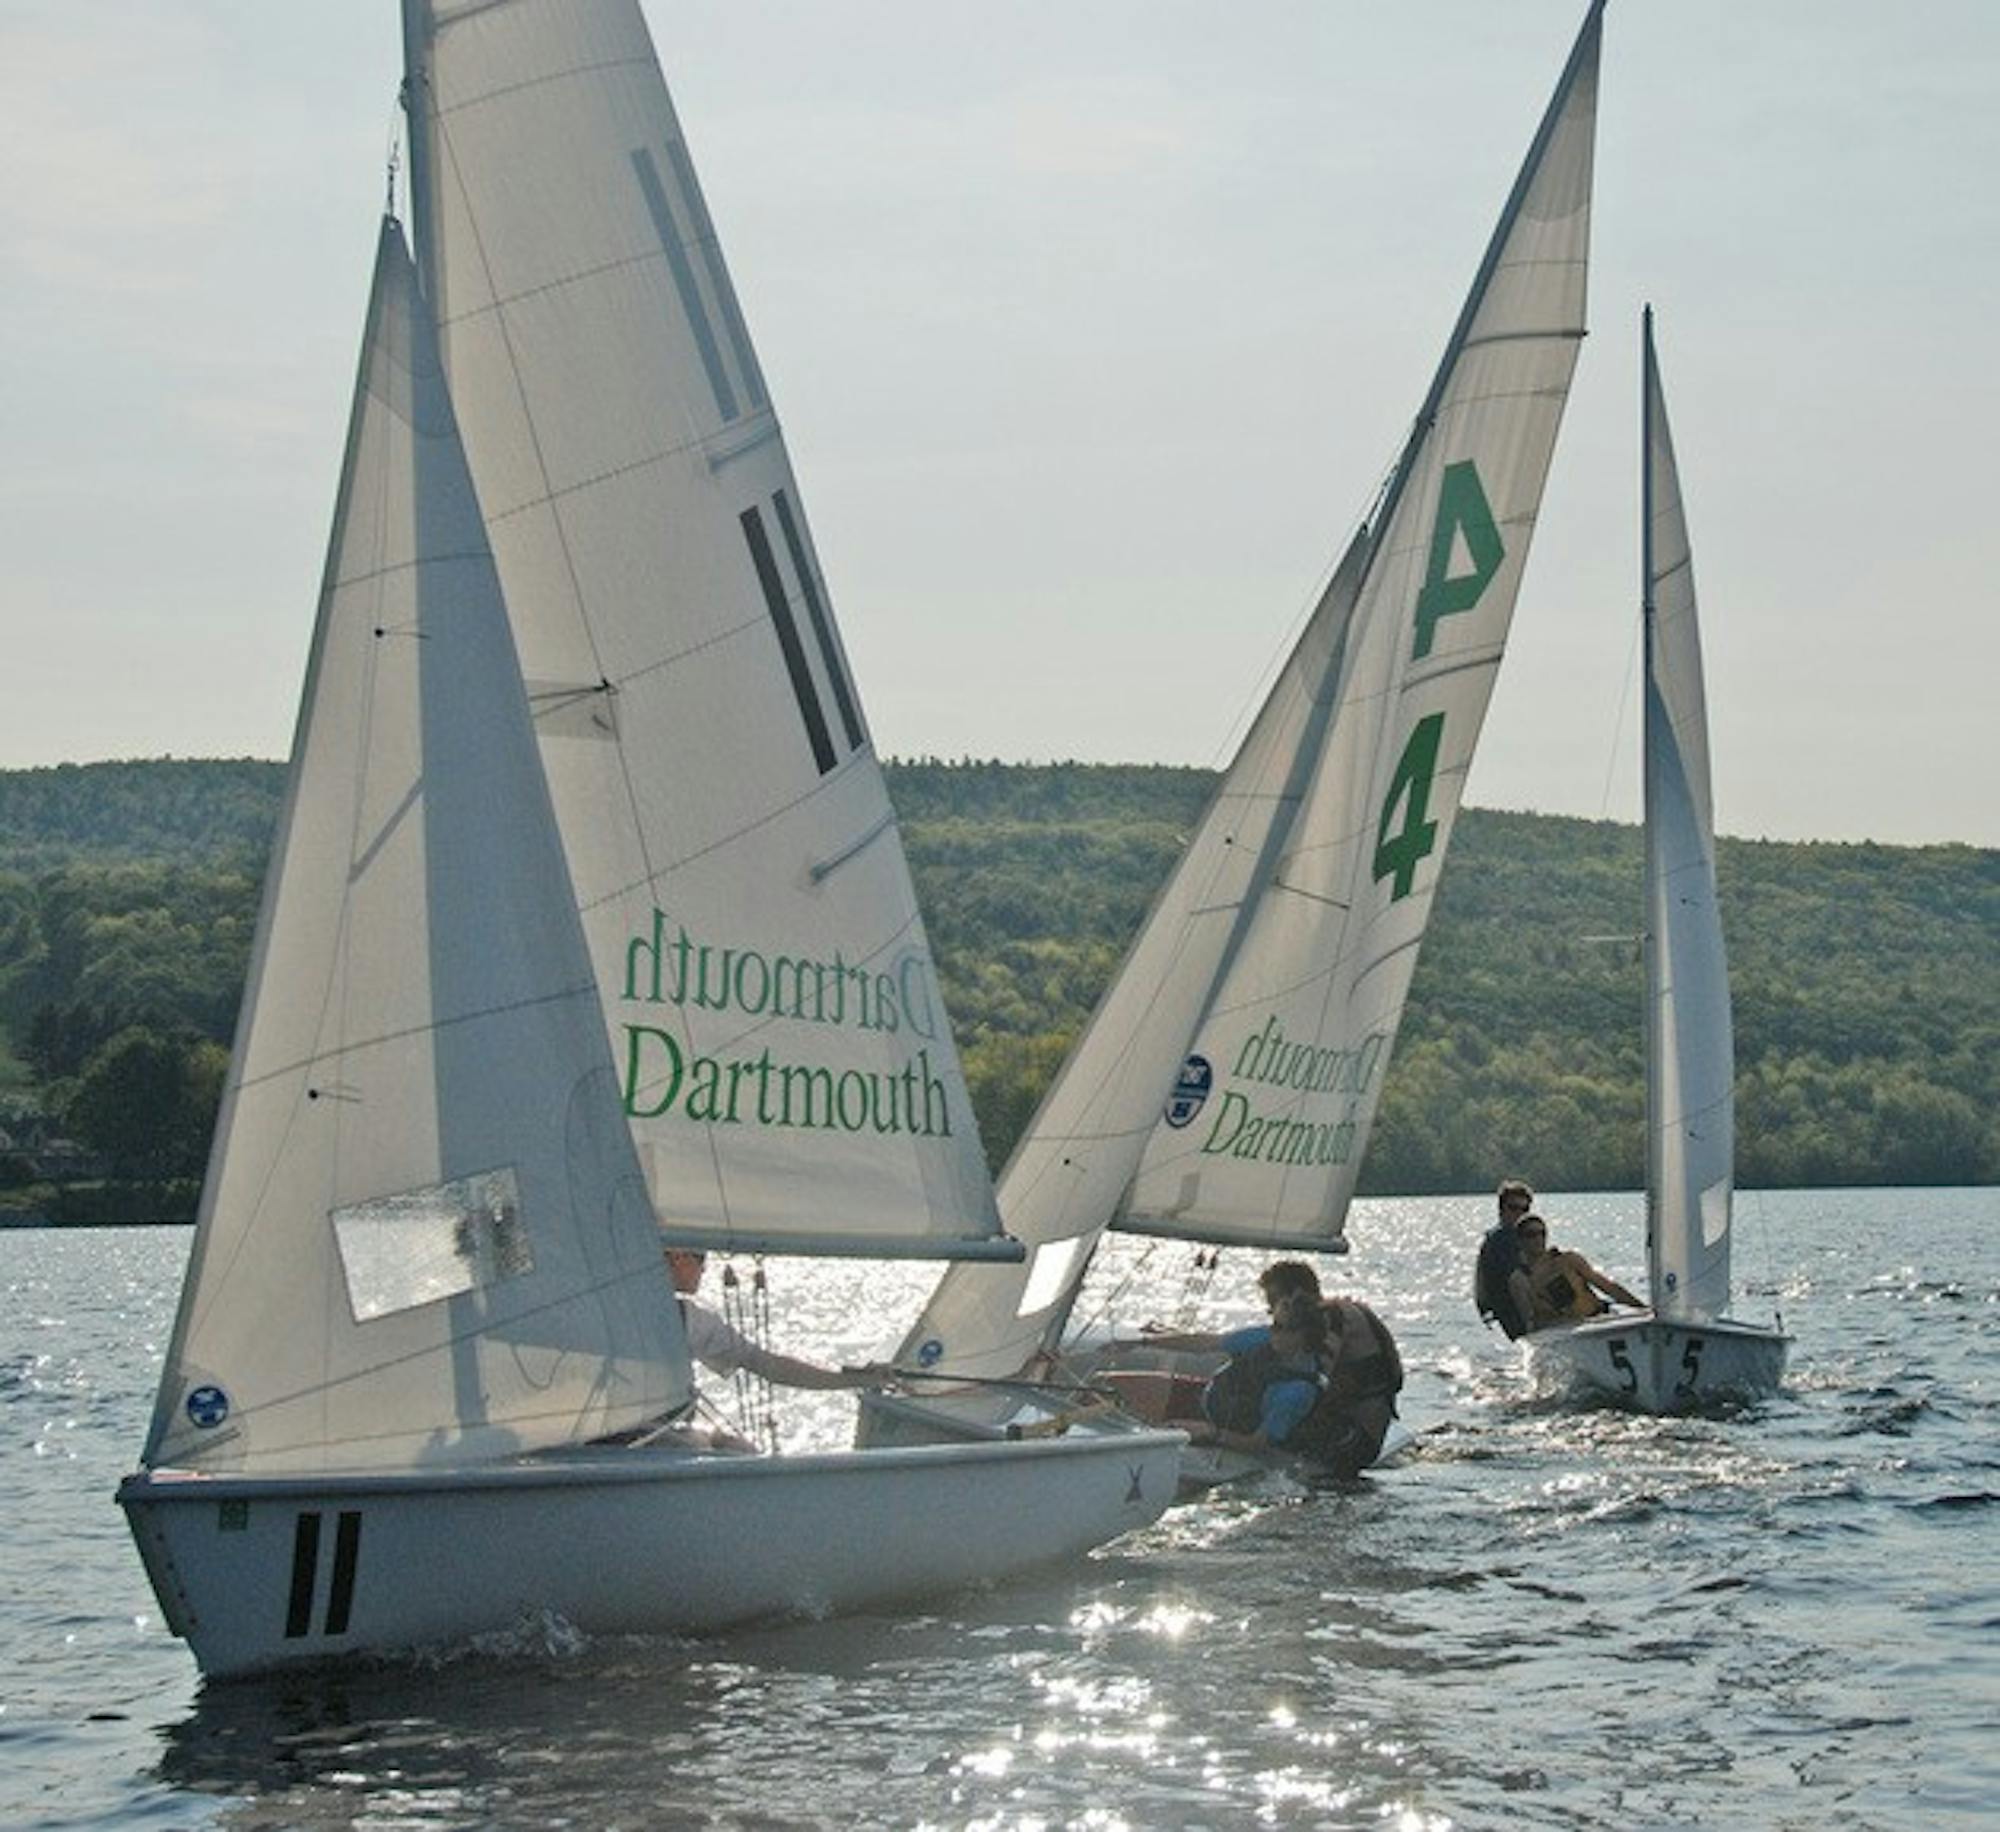 Dartmouth sailors found mixed results in four different regattas up and down the East Coast this weekend.